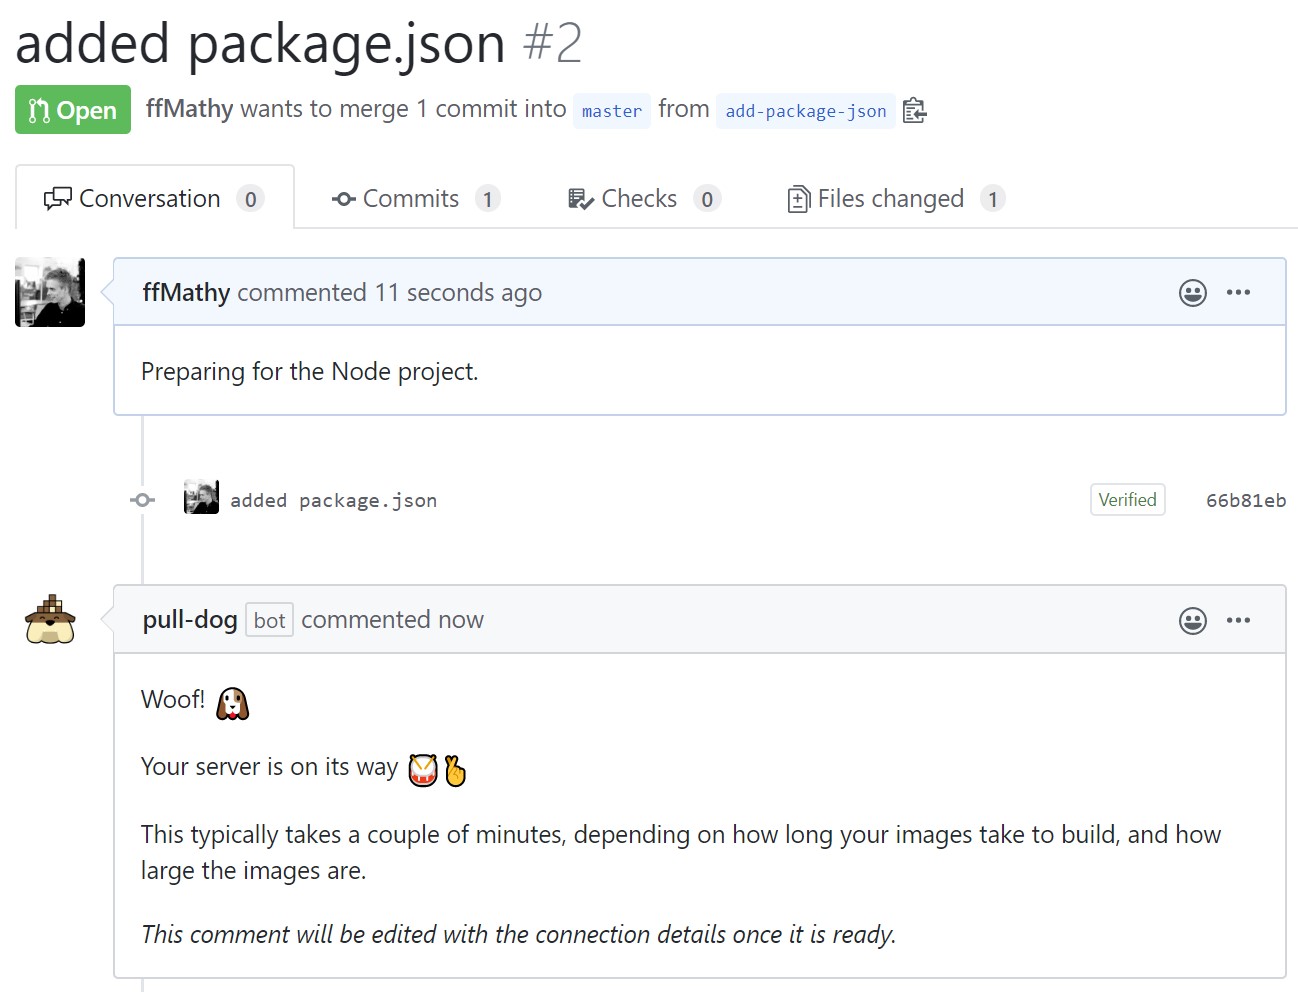 Pull Dog is provisioning a server here after opening the pull request